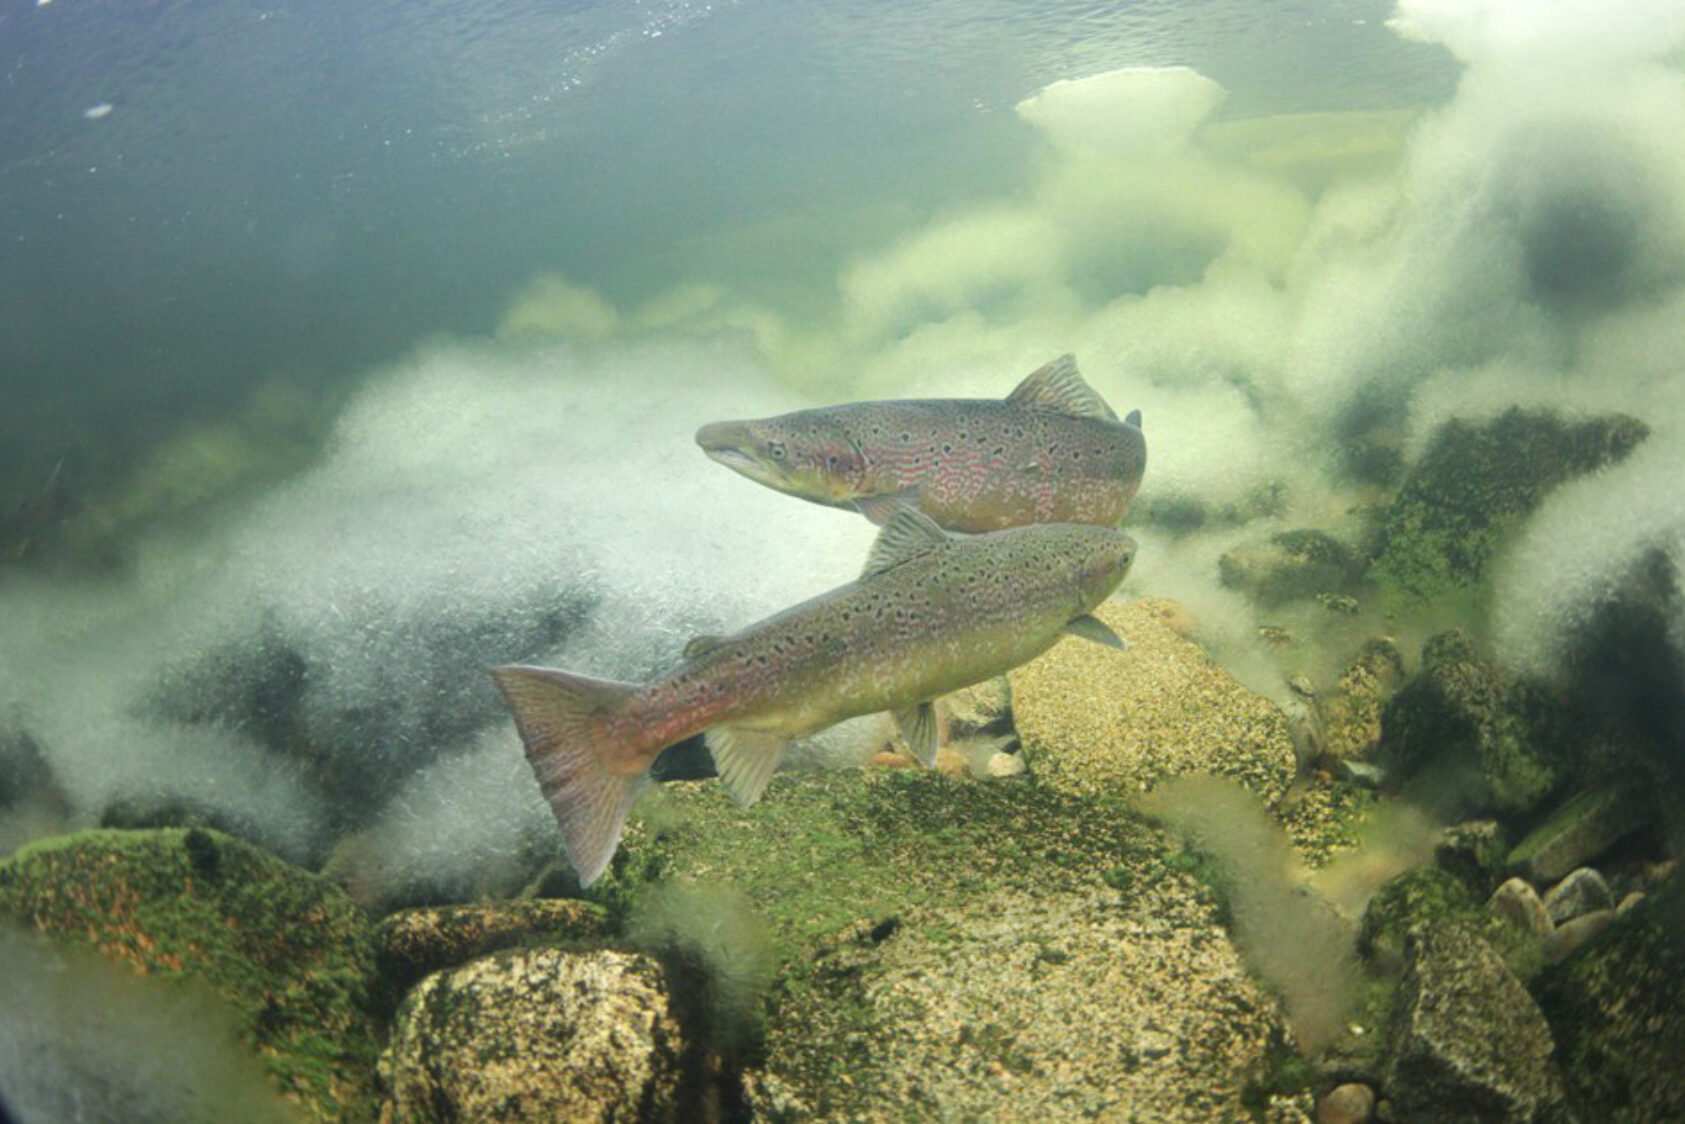 Bjørn Barlaup / NORCE LFI, Wild Atlantic salmon return from the sea to spawn in their native river. Here at a partially frozen spawning ground., Villaks1 bredde, , 